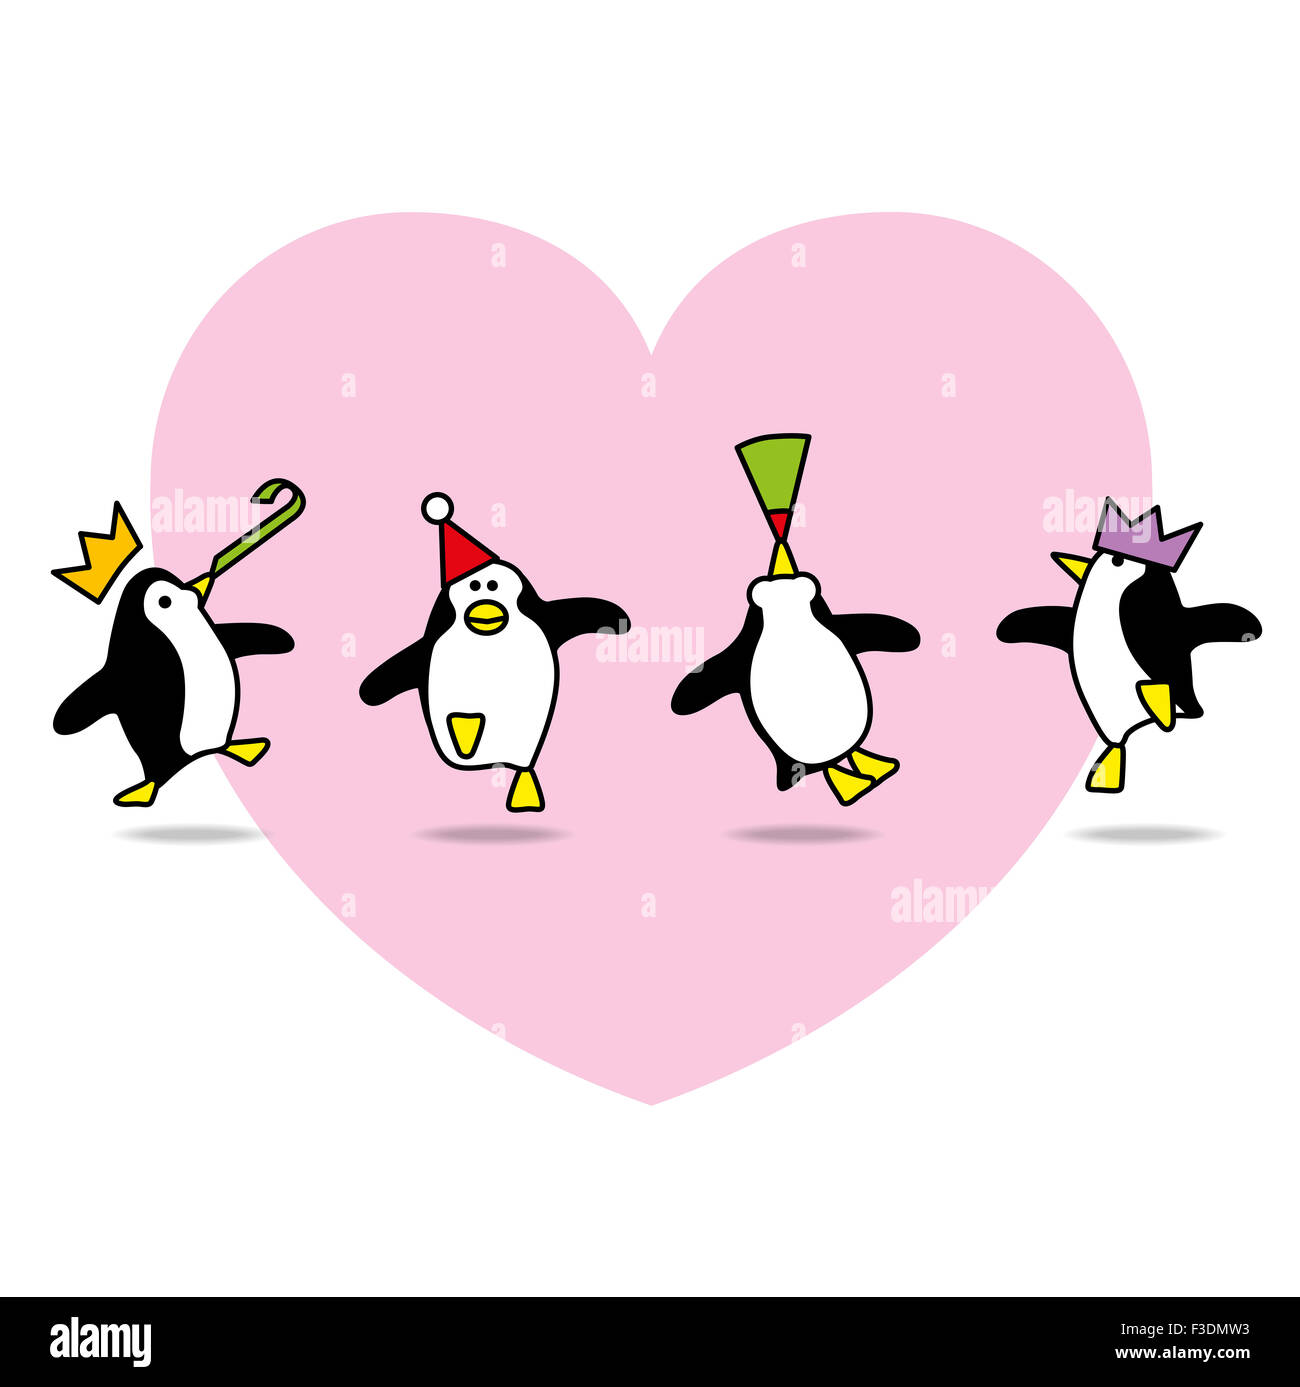 Four Happy Penguins in Party Hats Dancing in front of Pink Heart on White background Stock Photo